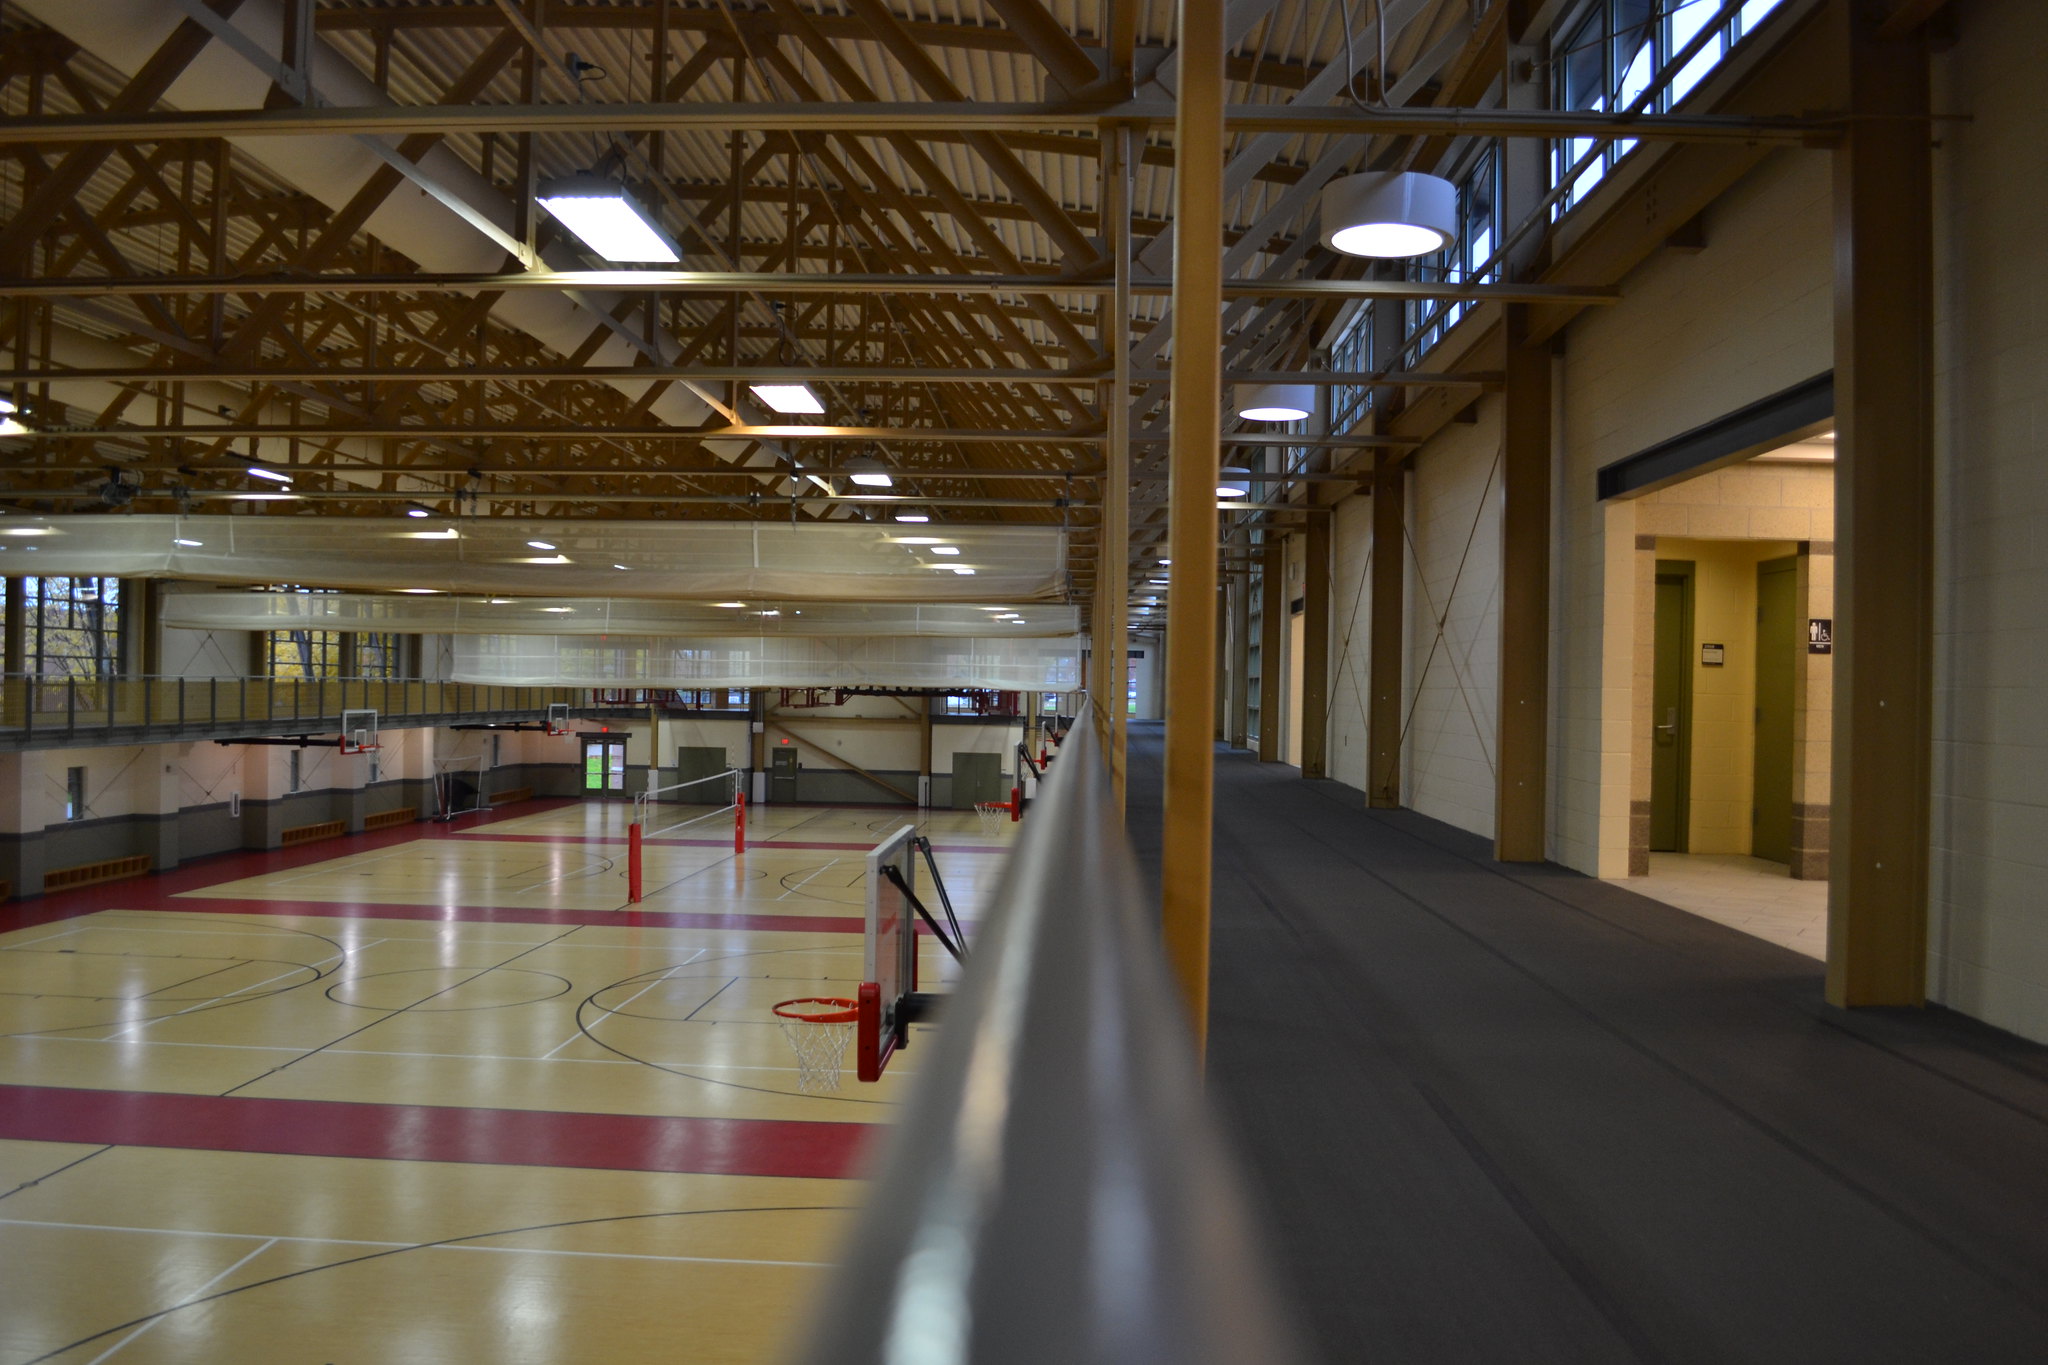 The Rec Center offers an indoor track, basketball courts, and high ropes